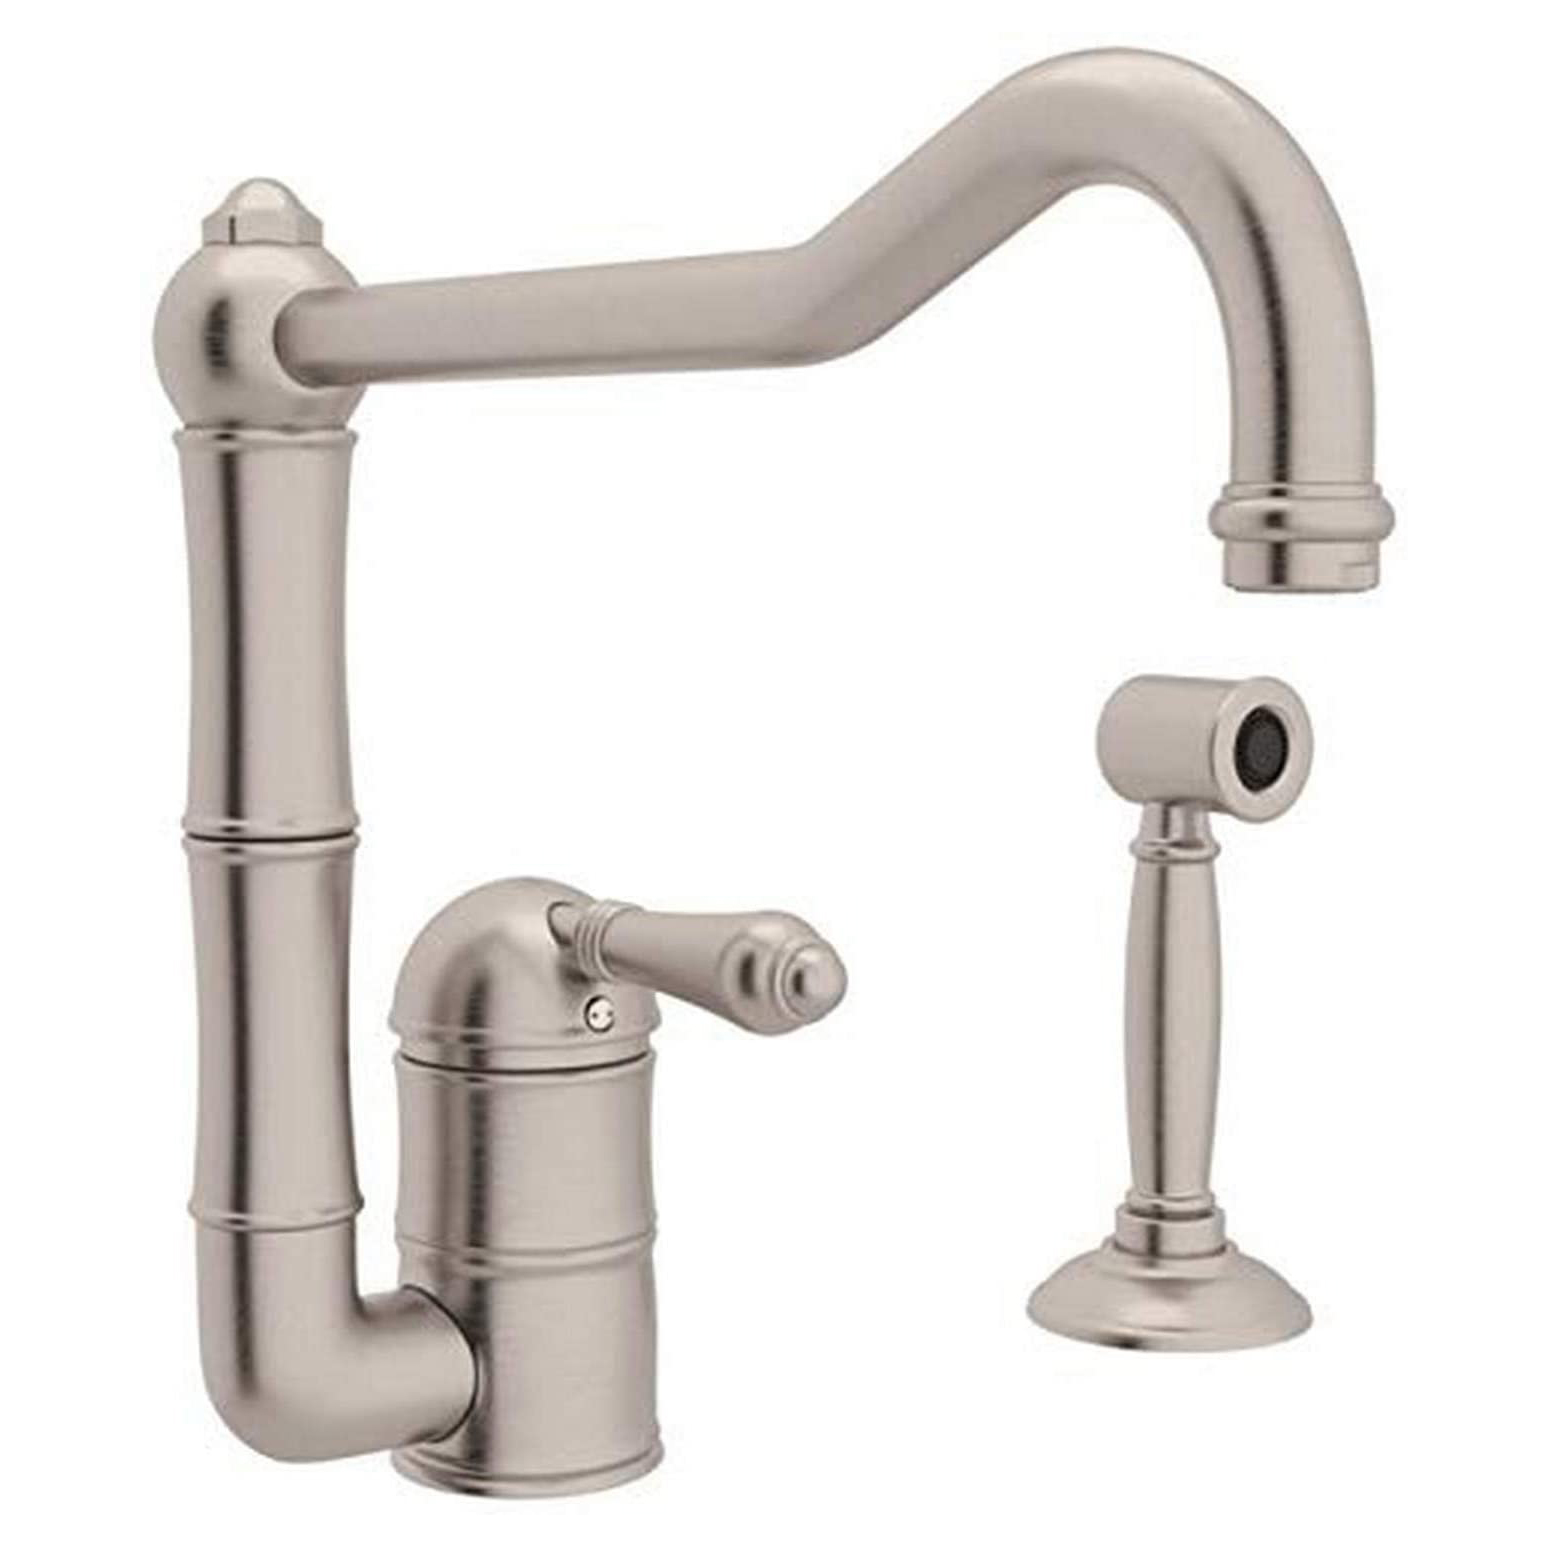 Italian Country Kitchen Faucet in Satin Nickel w/Metal Lever & Spray